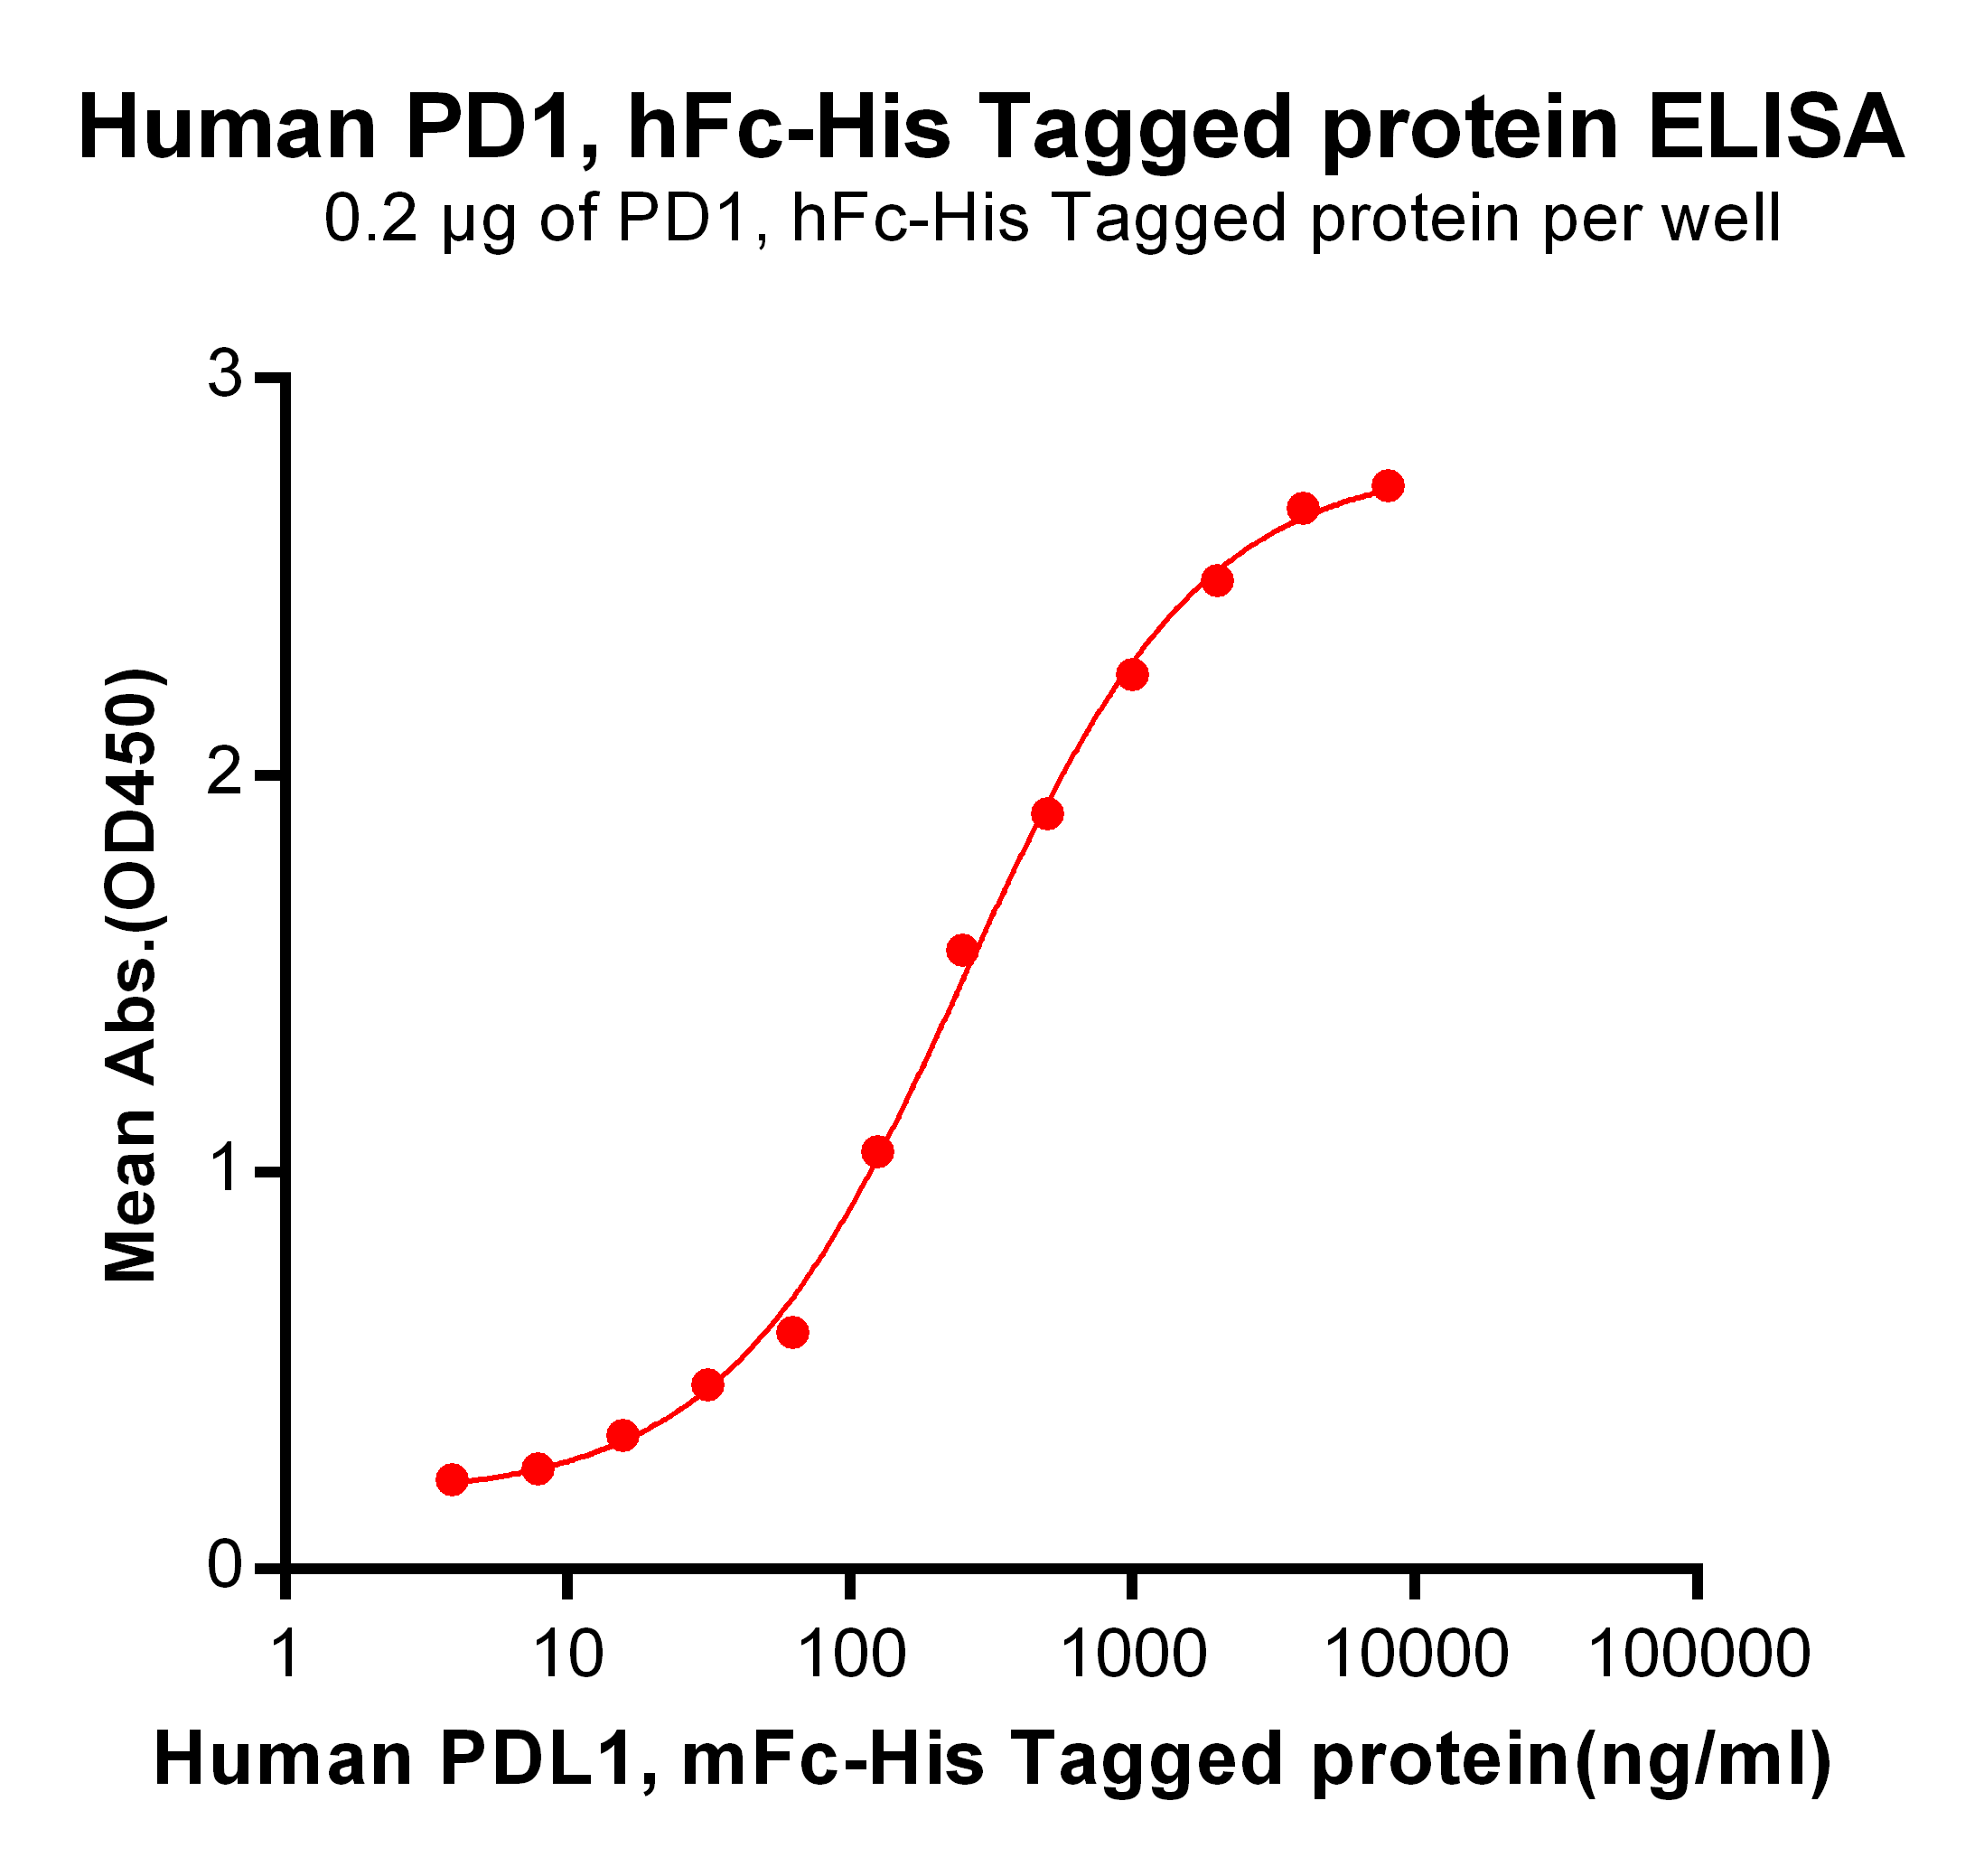 PME100462-PD1-hFc-His-ELISA-Fig2.png